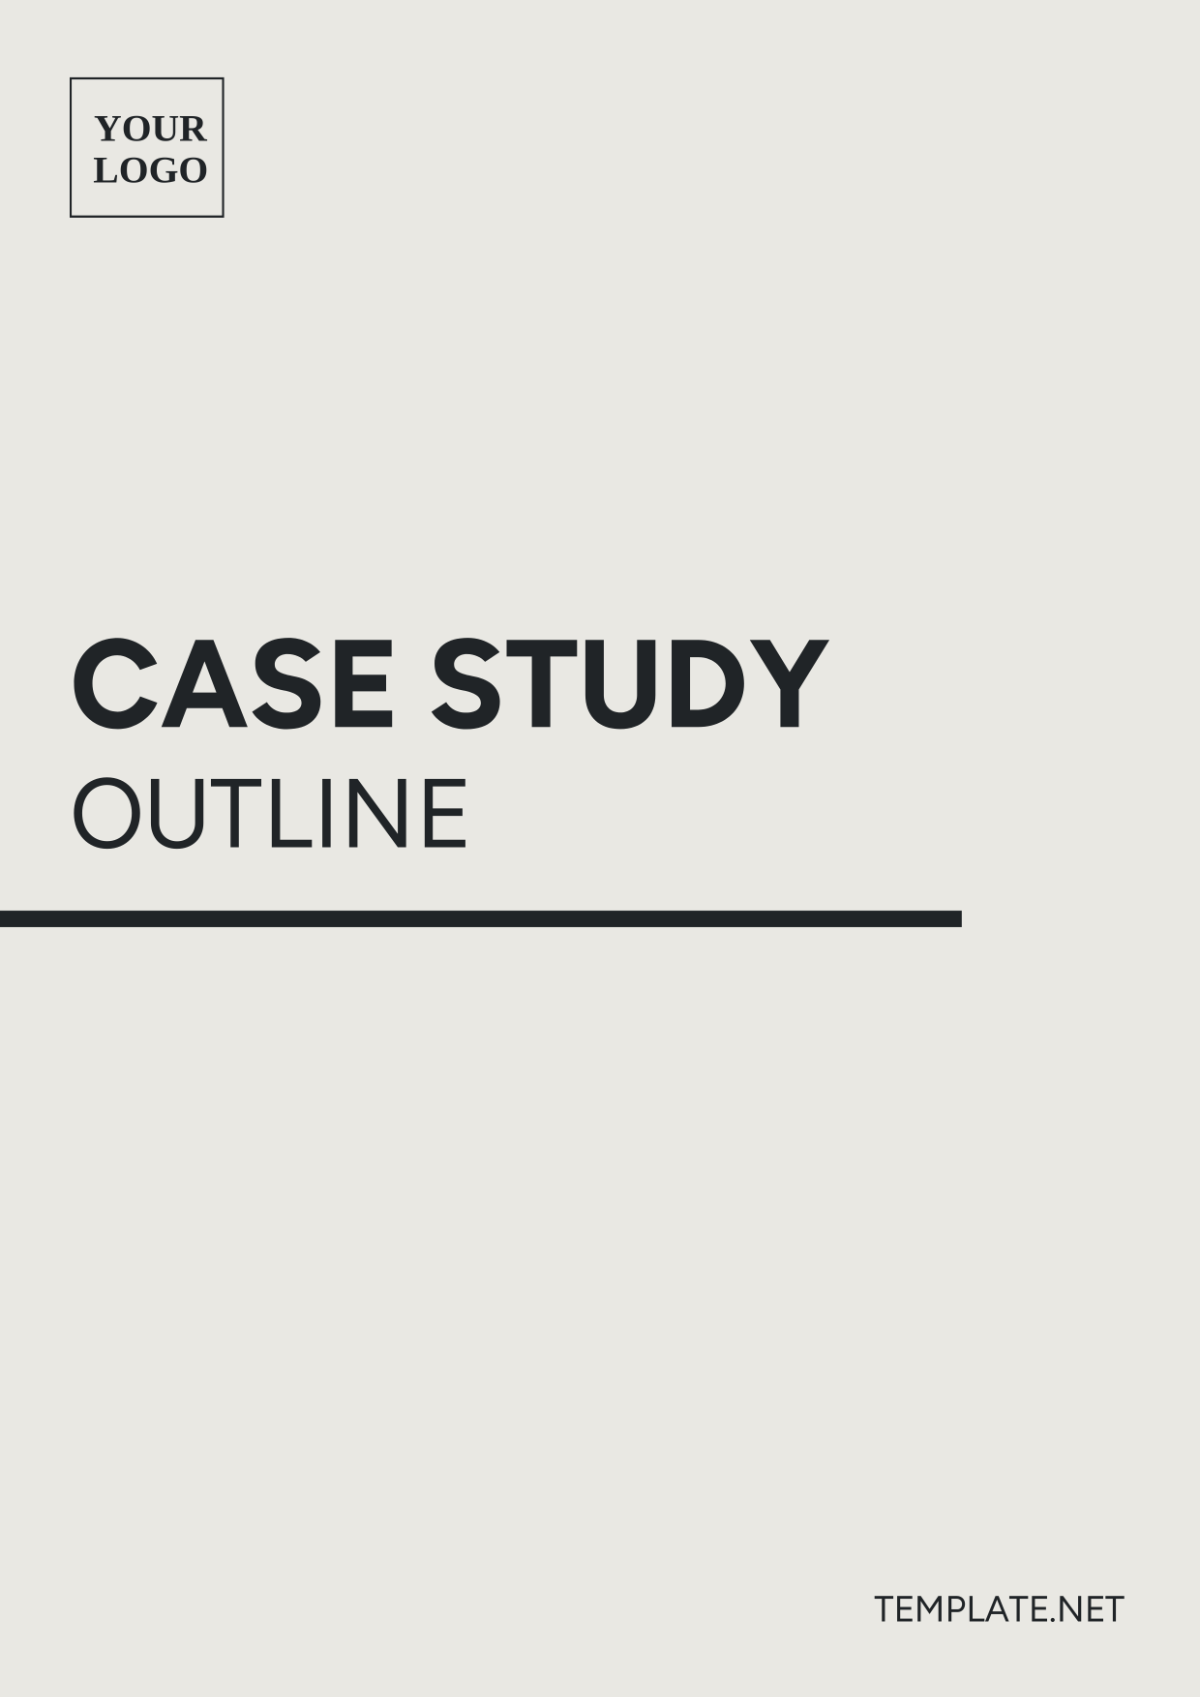 Case Study Outline Template